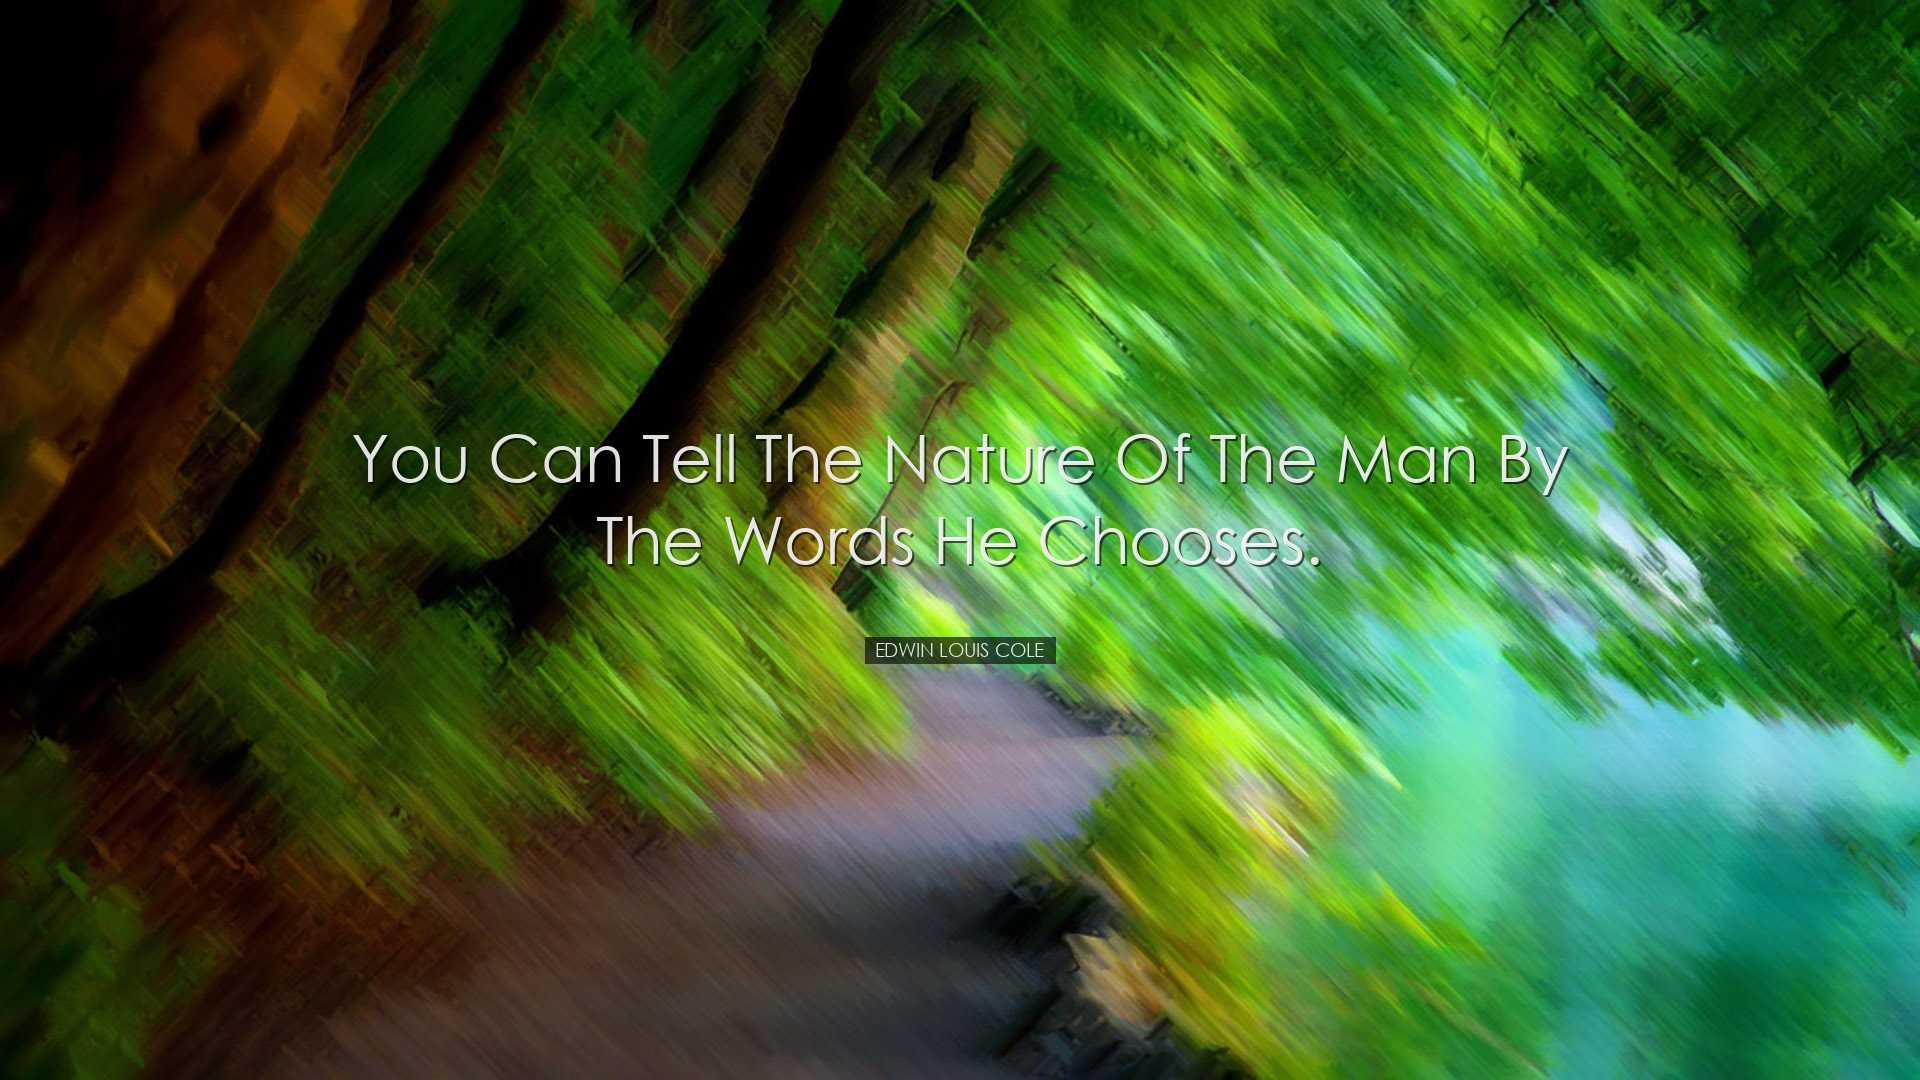 You can tell the nature of the man by the words he chooses. - Edwi